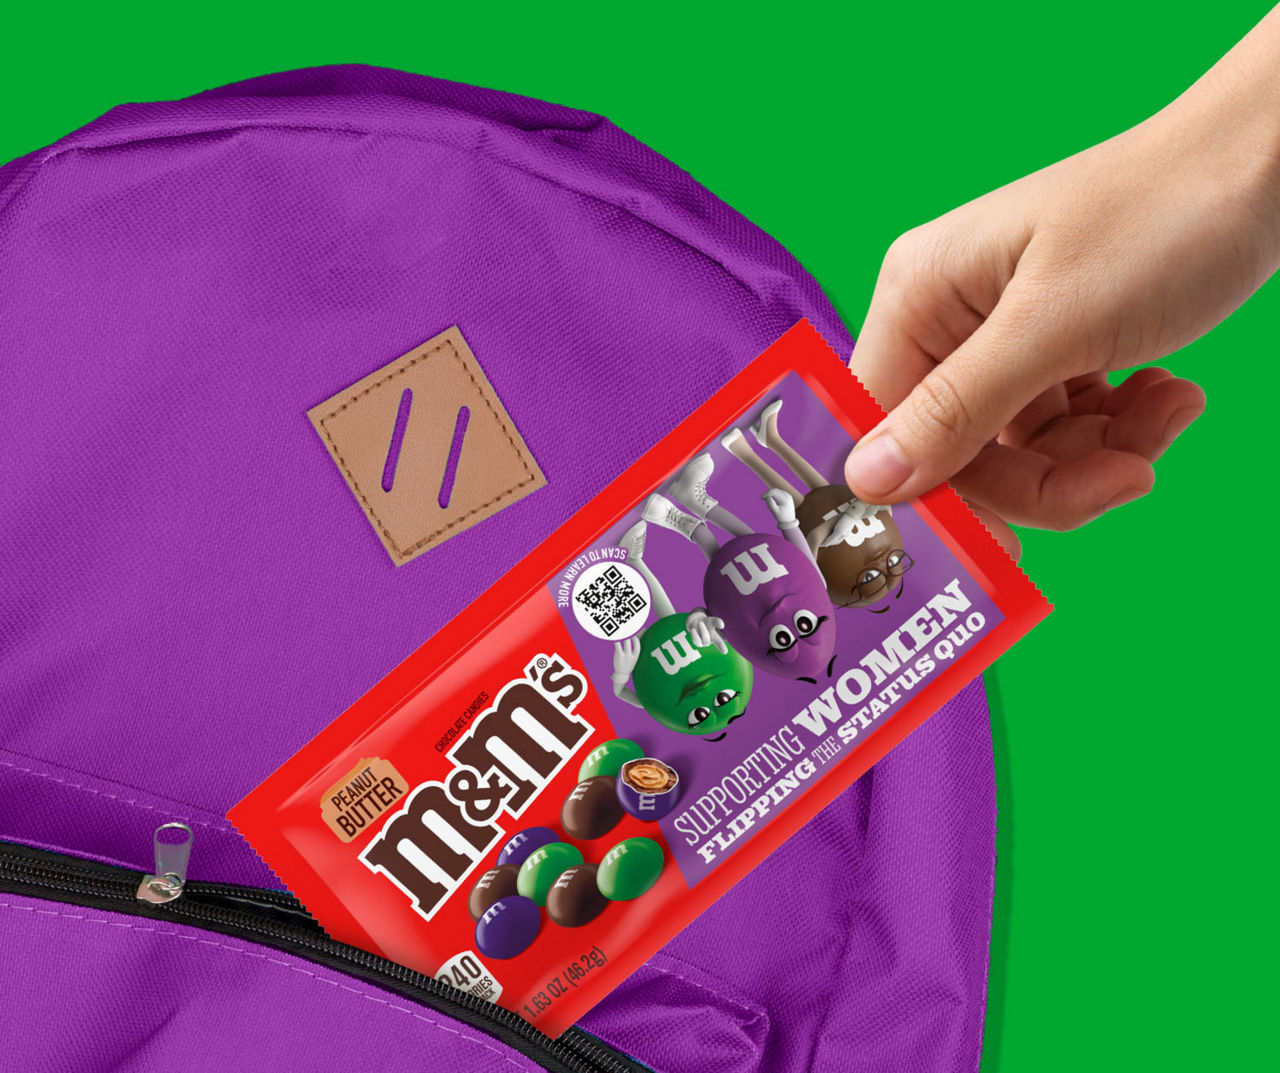 M&M's Limited Edition Peanut Butter Milk Chocolate Candy Featuring